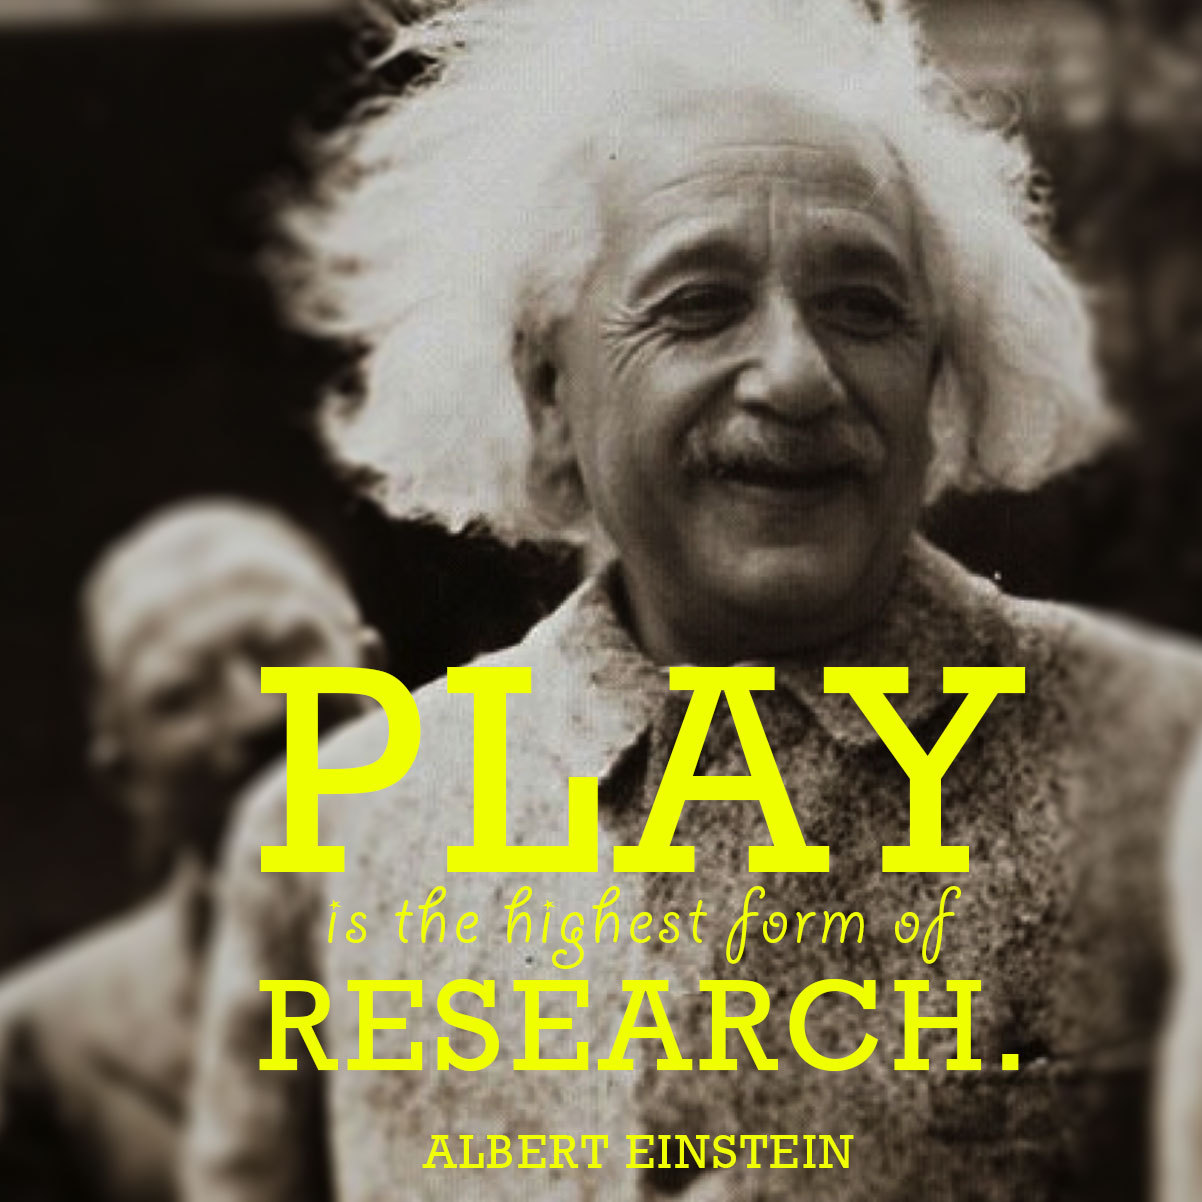 &#8220;Play is the highest form of research.&#8221;